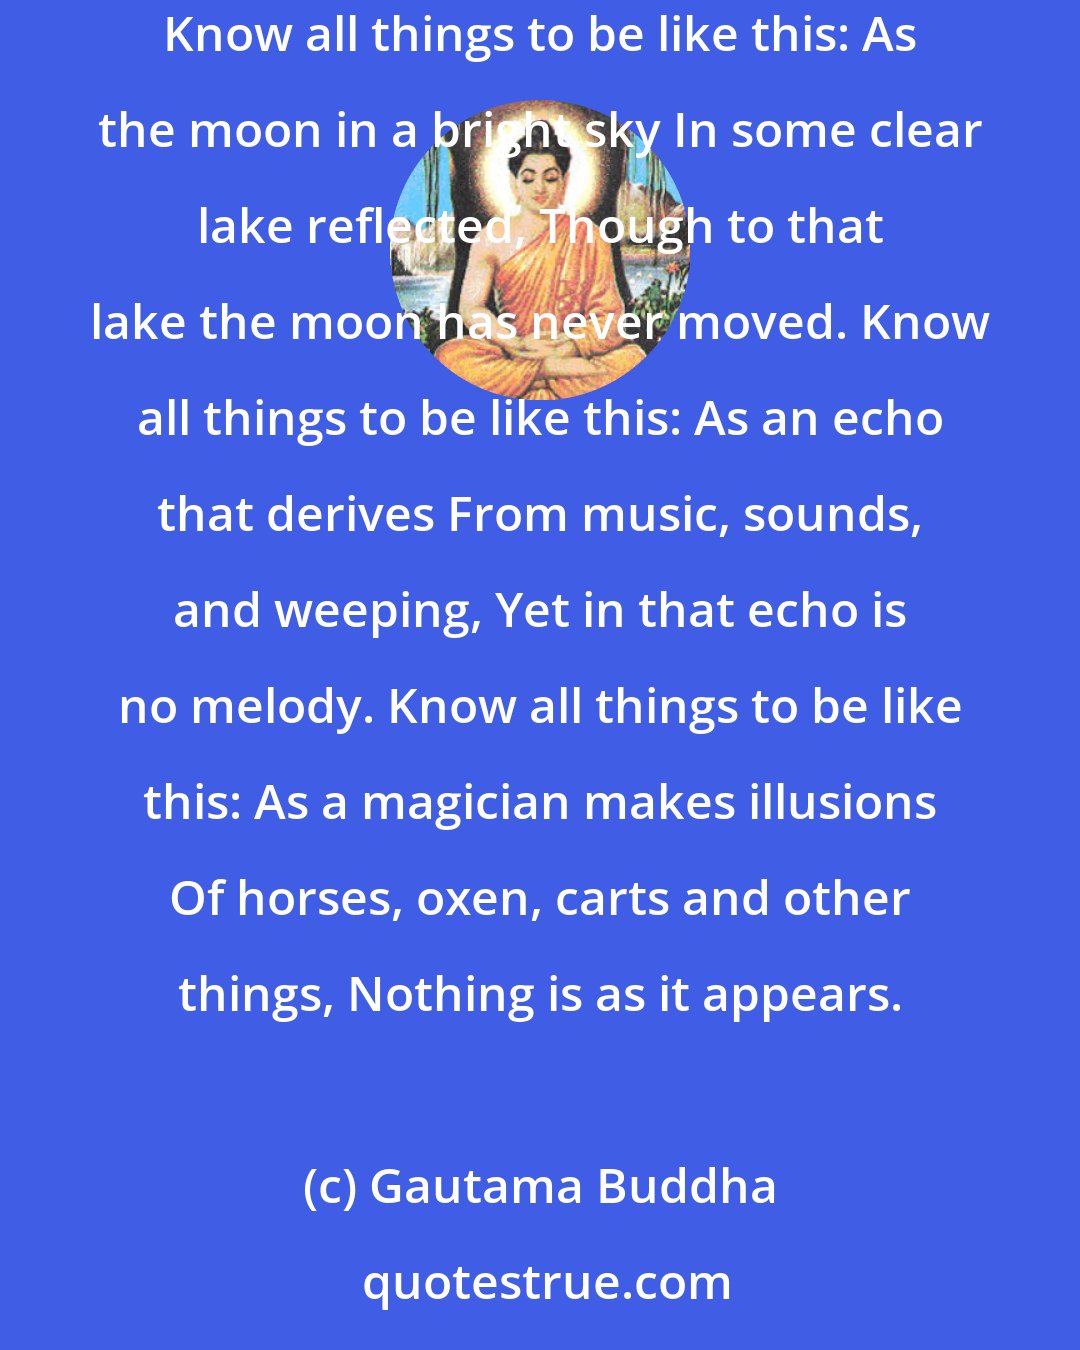 Gautama Buddha: Know all things to be like this: A mirage, a cloud castle, A dream, an apparition, Without essence, but with qualities that can be seen. Know all things to be like this: As the moon in a bright sky In some clear lake reflected, Though to that lake the moon has never moved. Know all things to be like this: As an echo that derives From music, sounds, and weeping, Yet in that echo is no melody. Know all things to be like this: As a magician makes illusions Of horses, oxen, carts and other things, Nothing is as it appears.